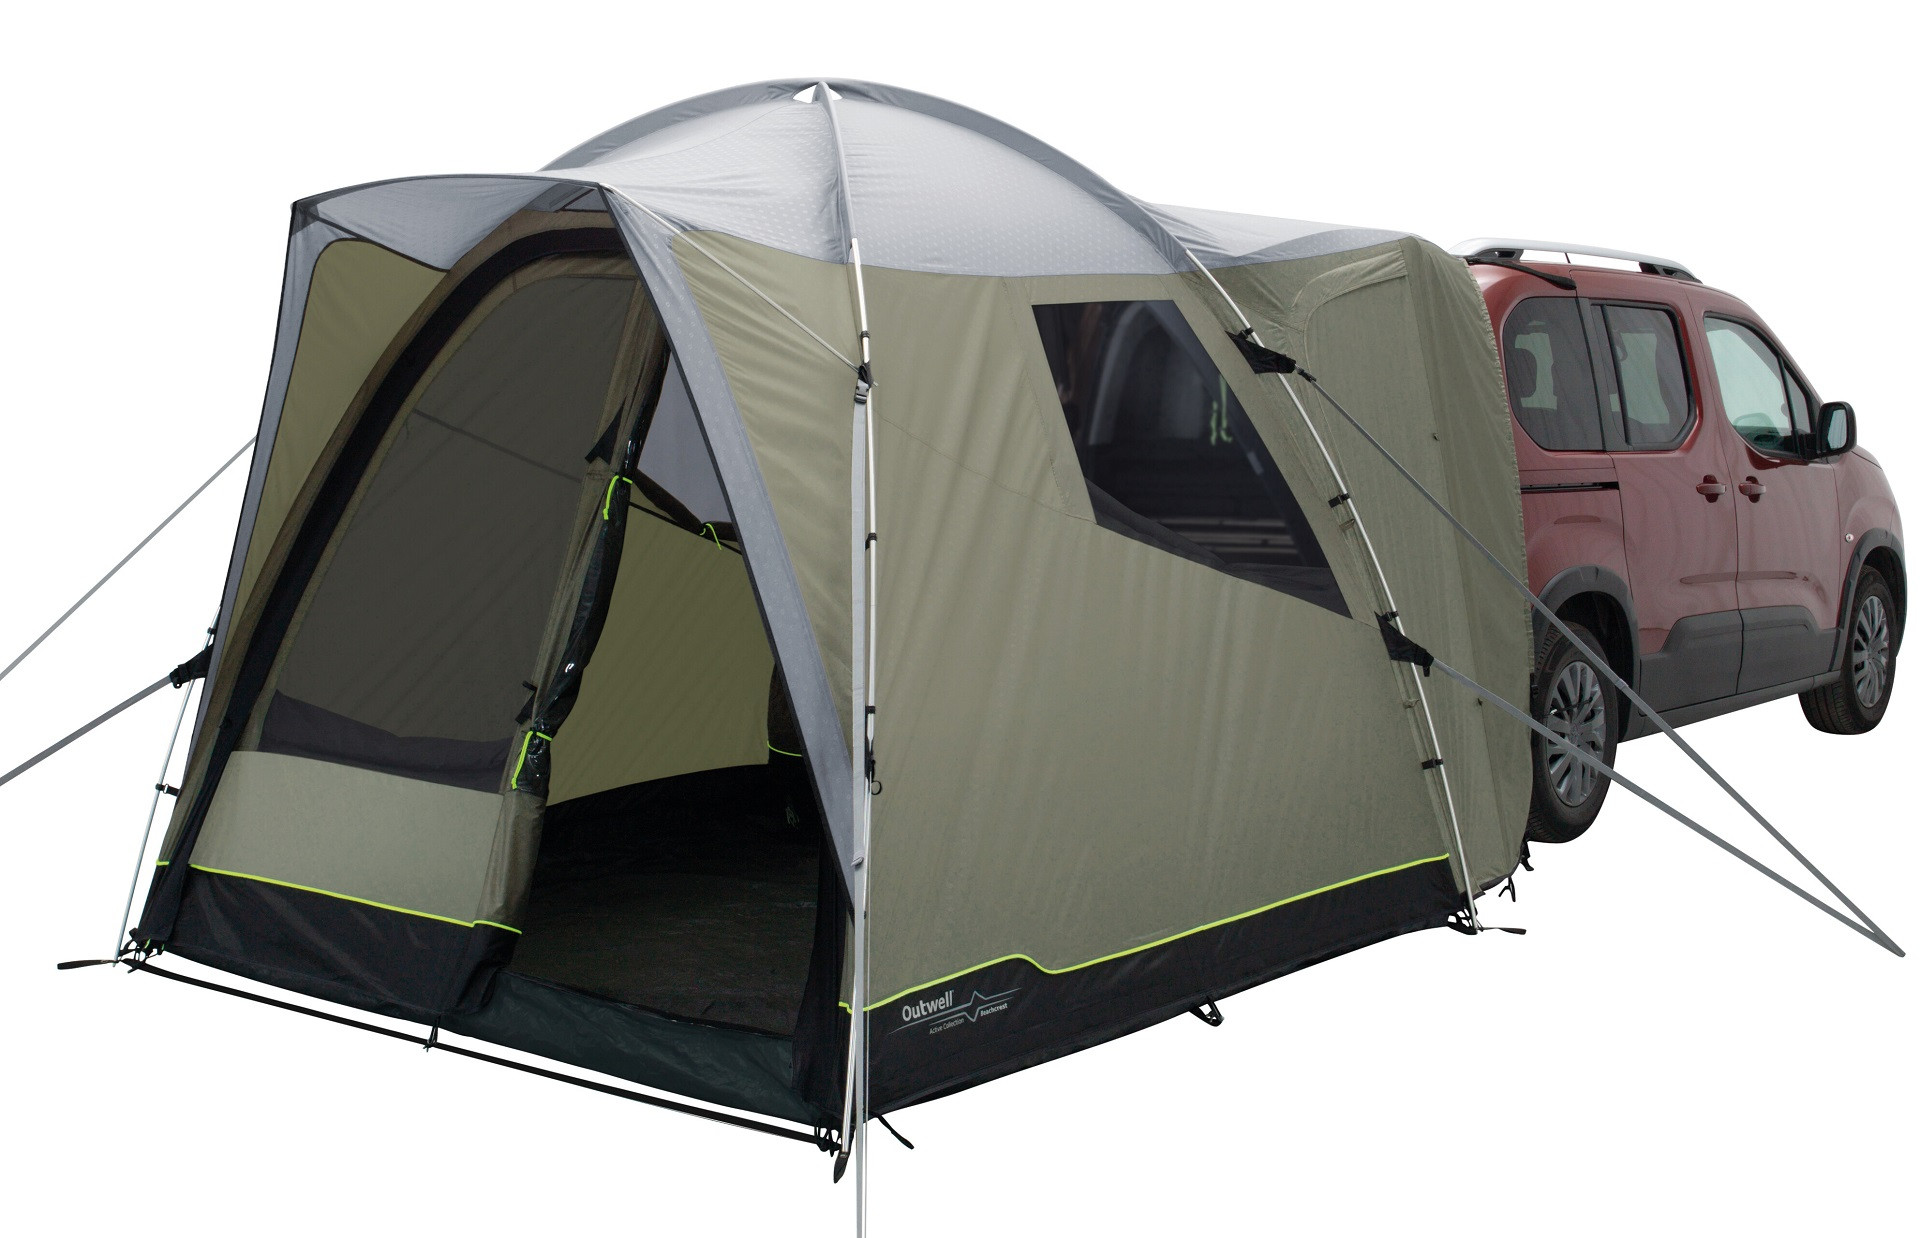 Tailgate Tents, Tailgate Awnings